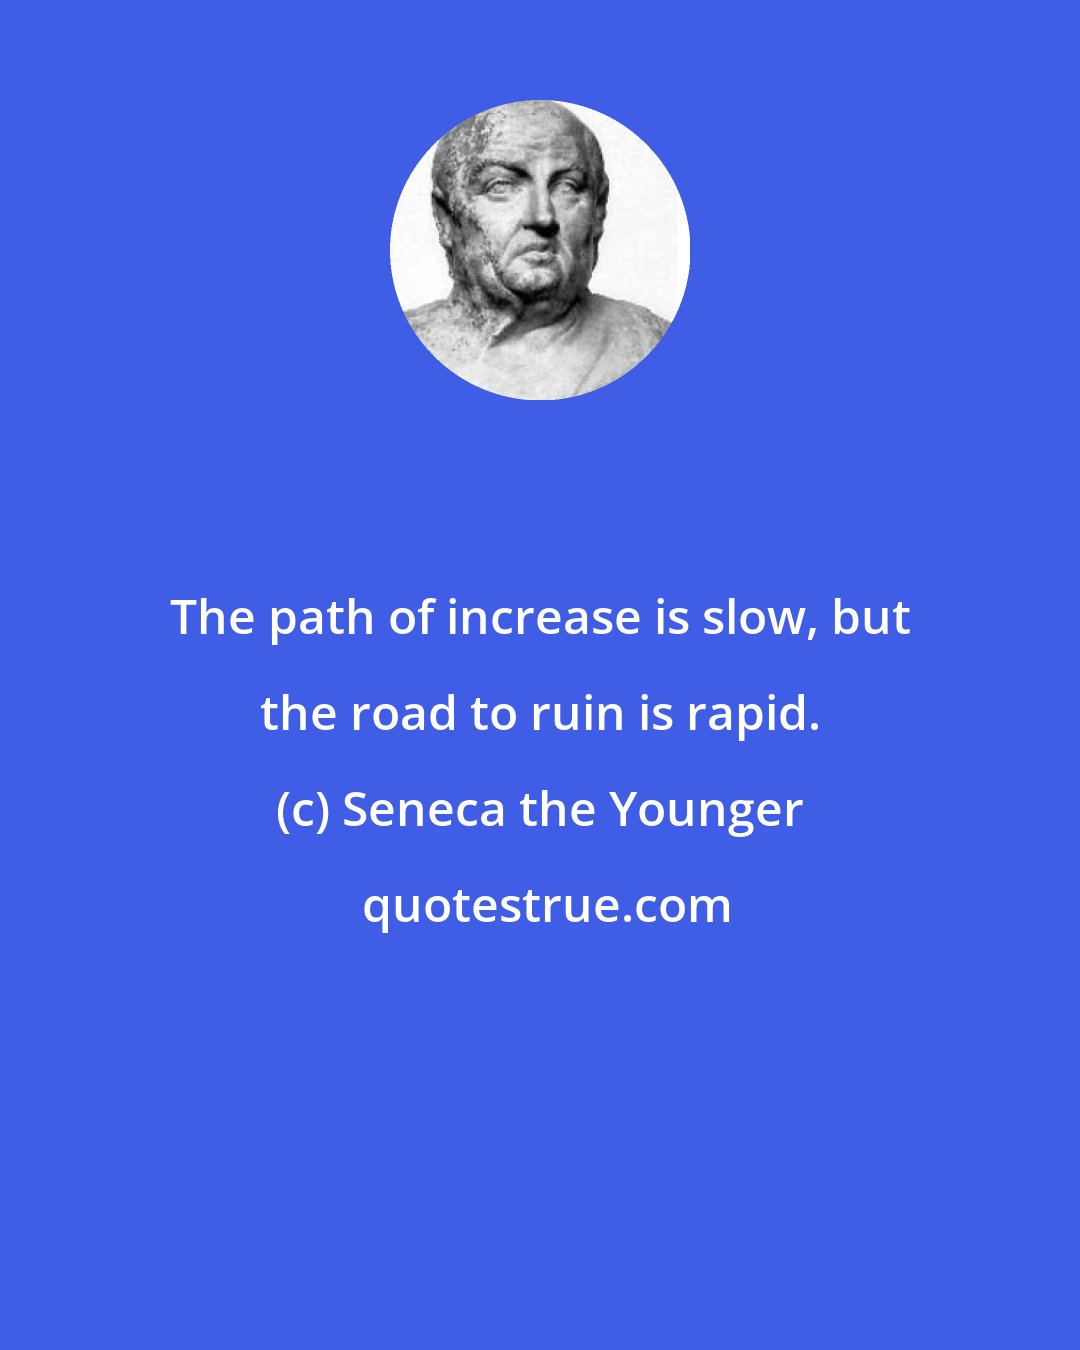 Seneca the Younger: The path of increase is slow, but the road to ruin is rapid.